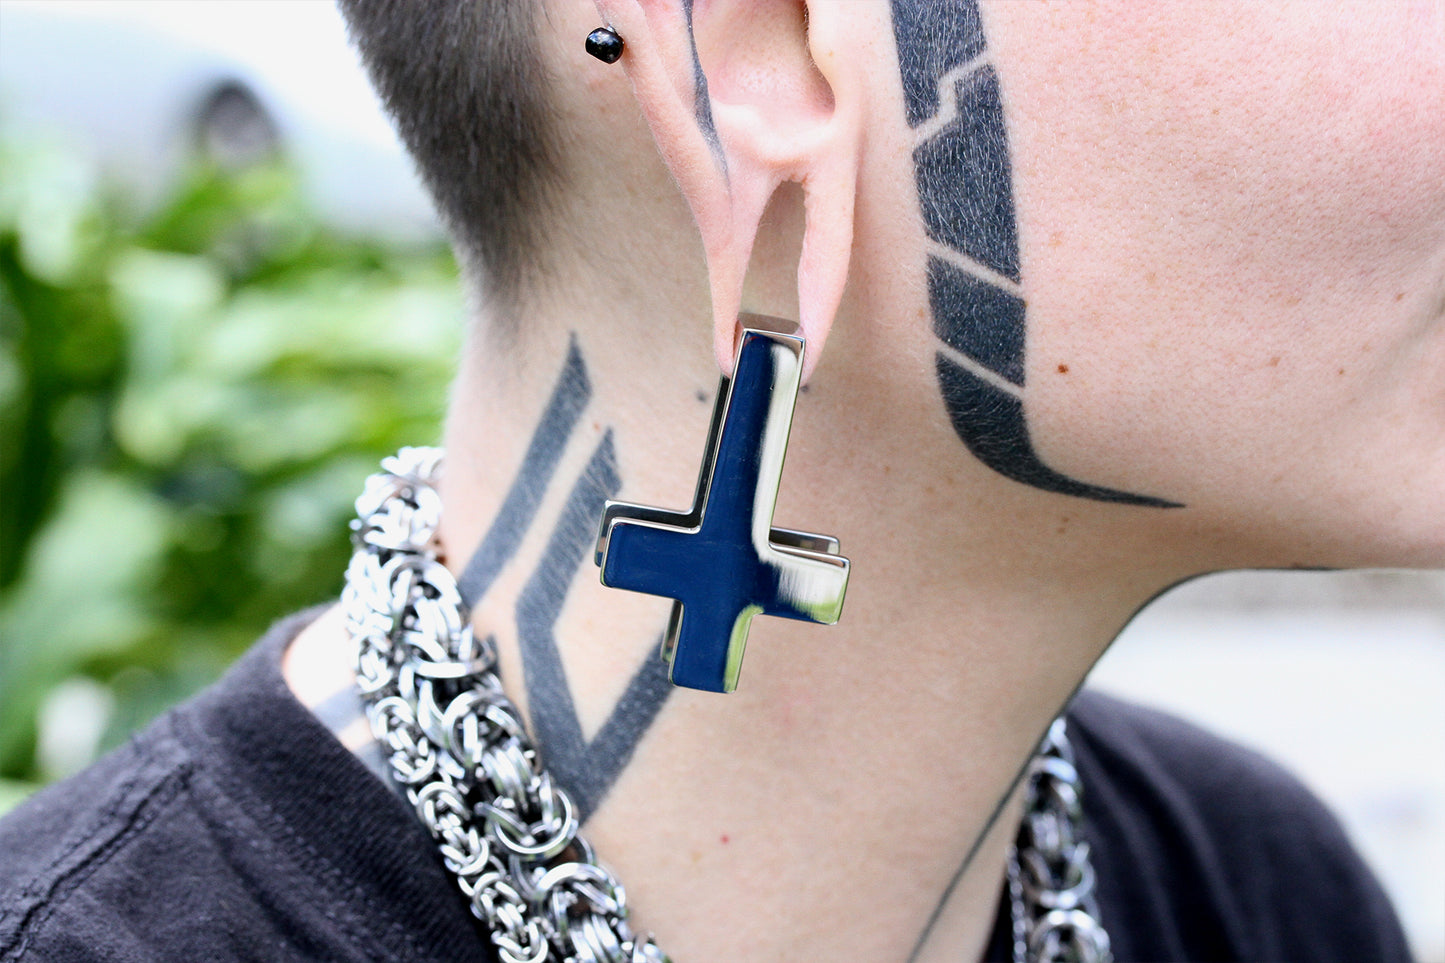 Inverted Steel Cross Ear Weights (Pair) - PSS110